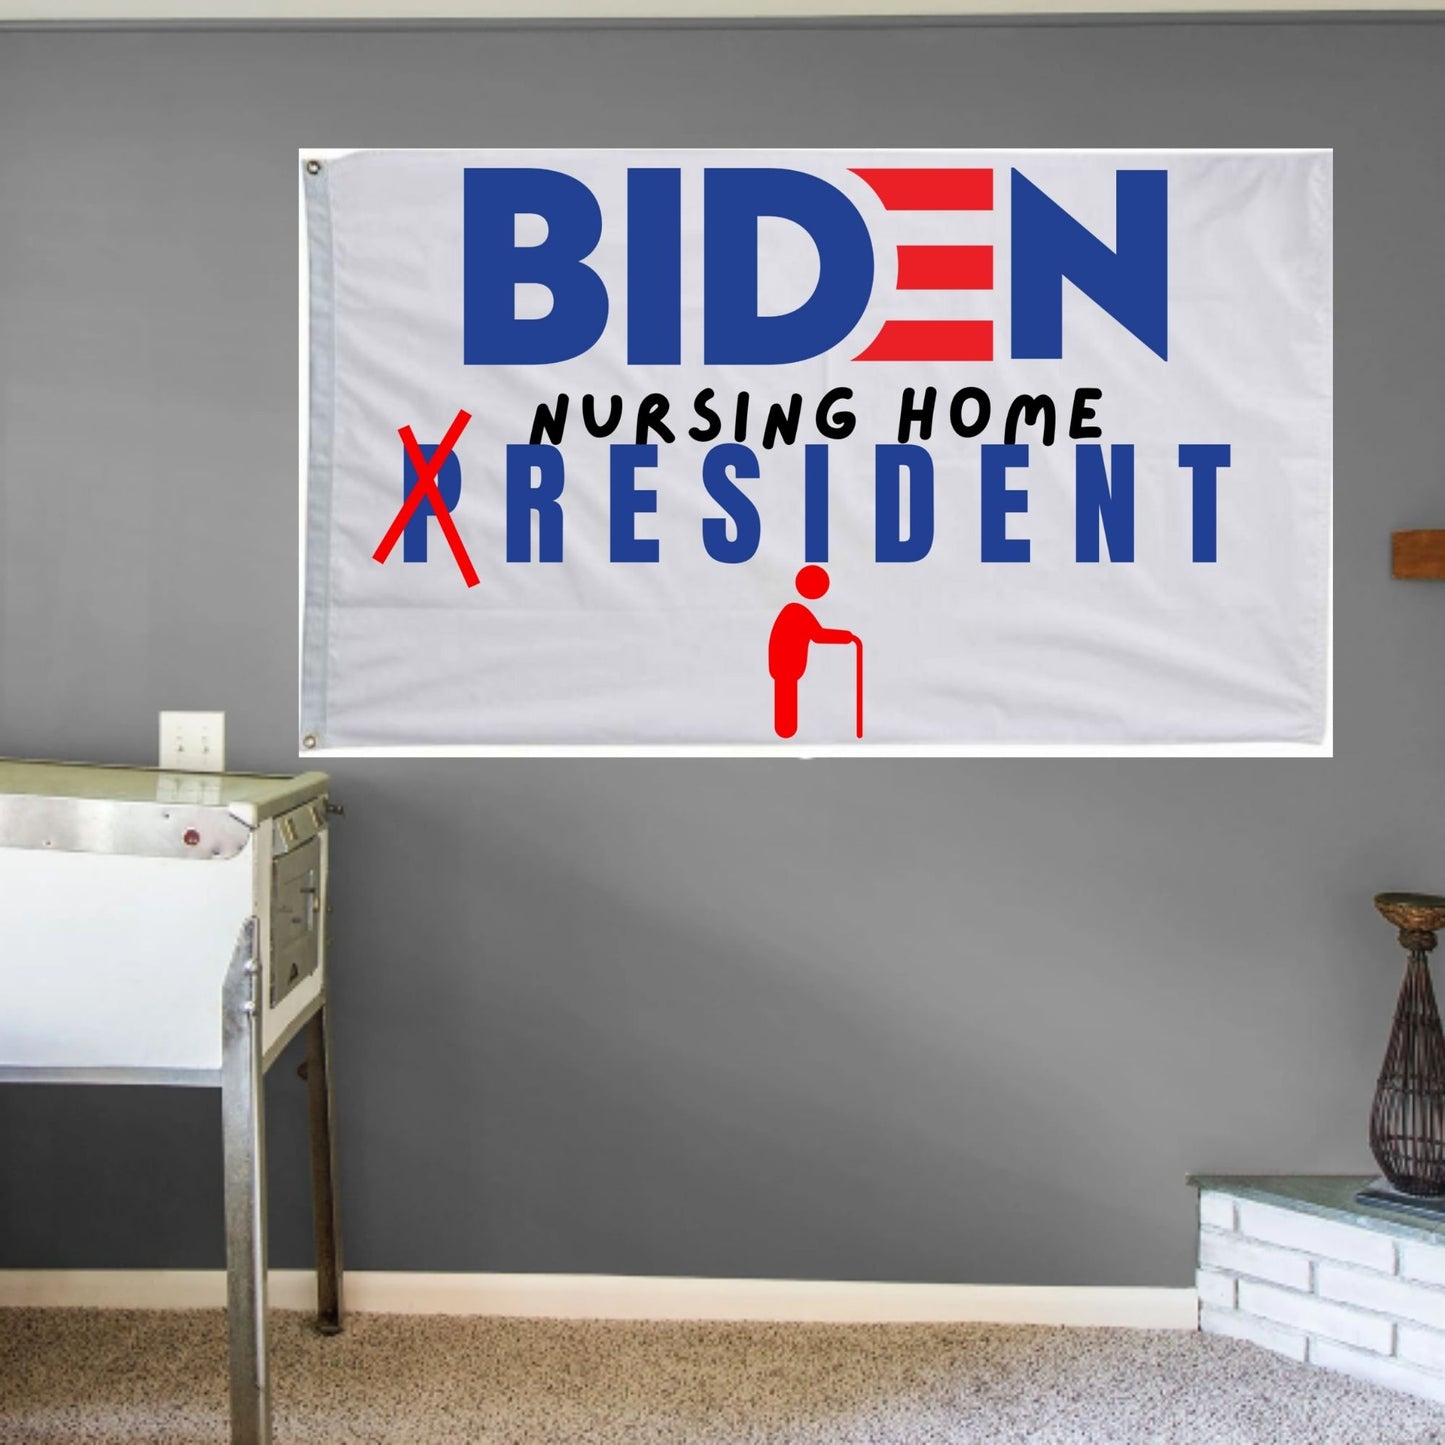 Joe Biden Nursing Home Resident Wall Flag | Funny Anti Biden 3x5 ft Single-Sided Banner with Grommets | Great Gift Idea for Trump Supporter Republicans